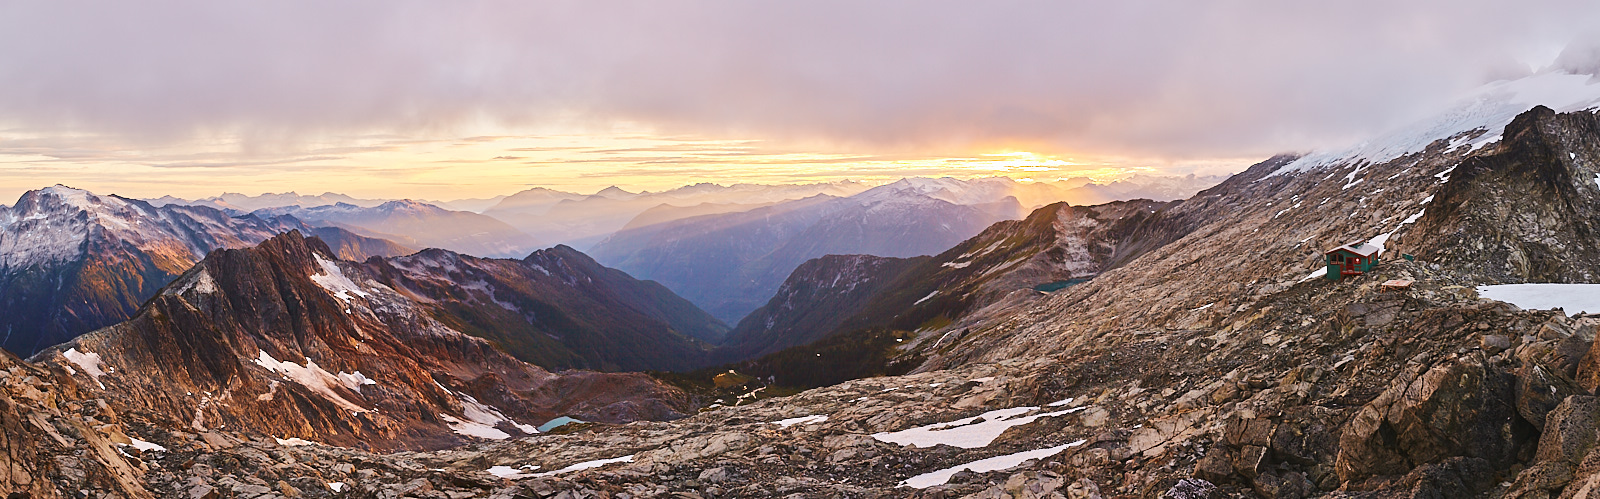 Sunset panorama with Haberl Hut visible on mid right